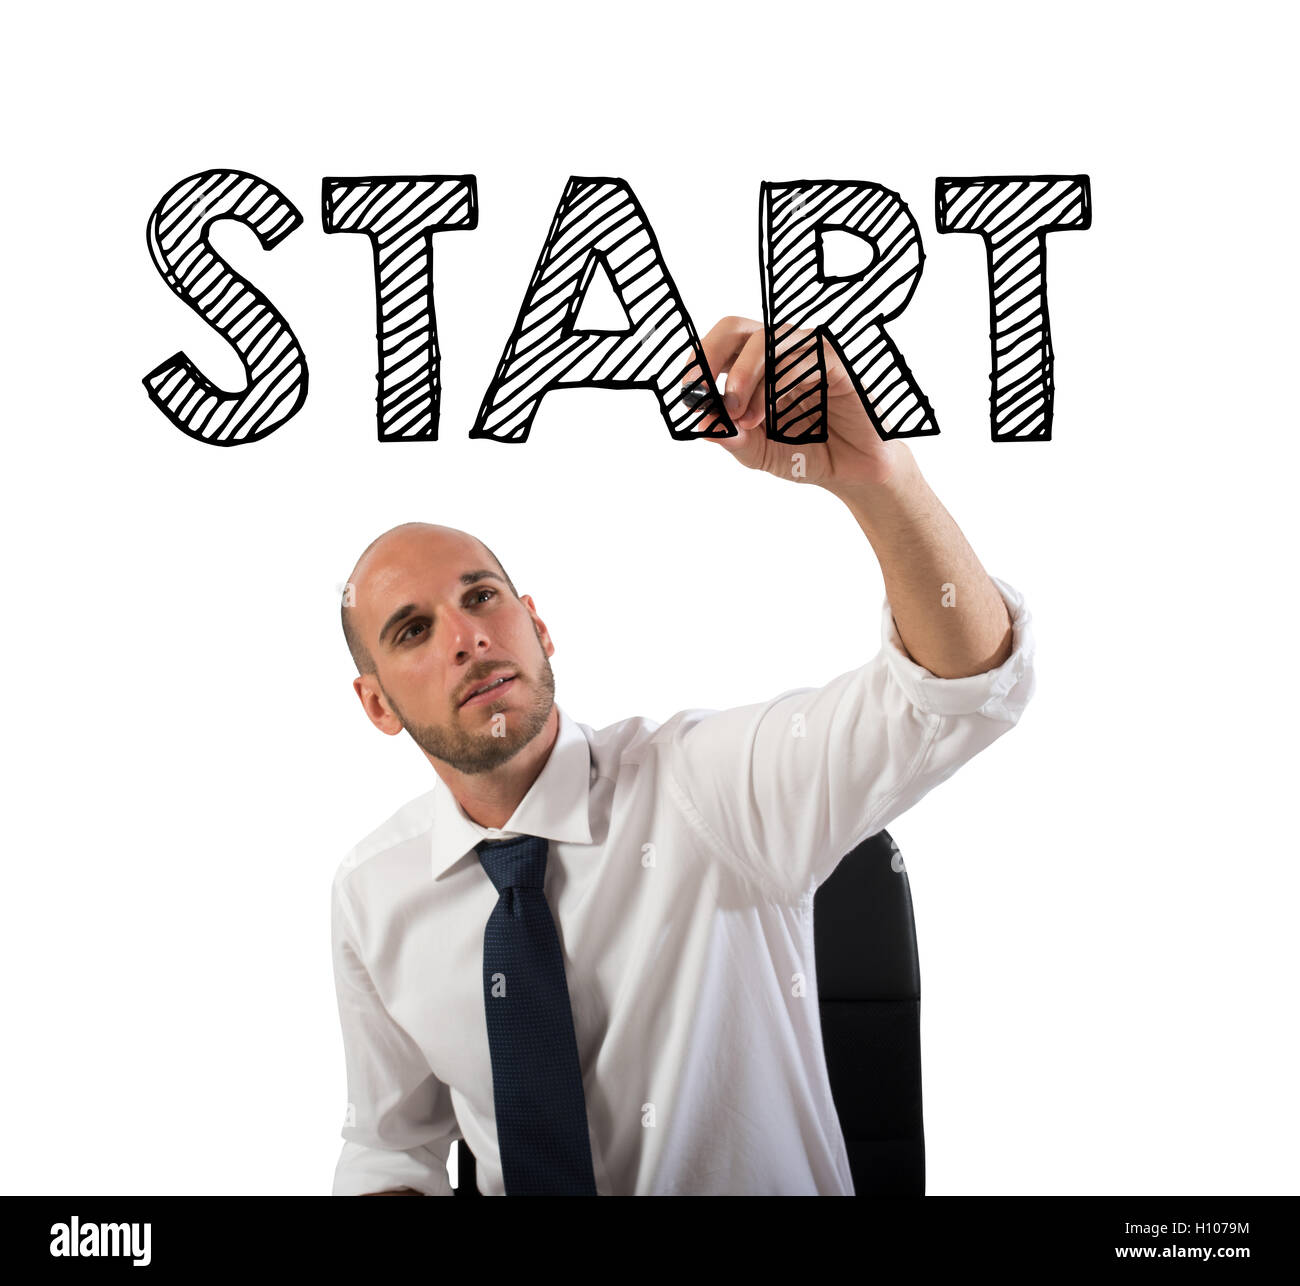 Start a business sucessful career Stock Photo